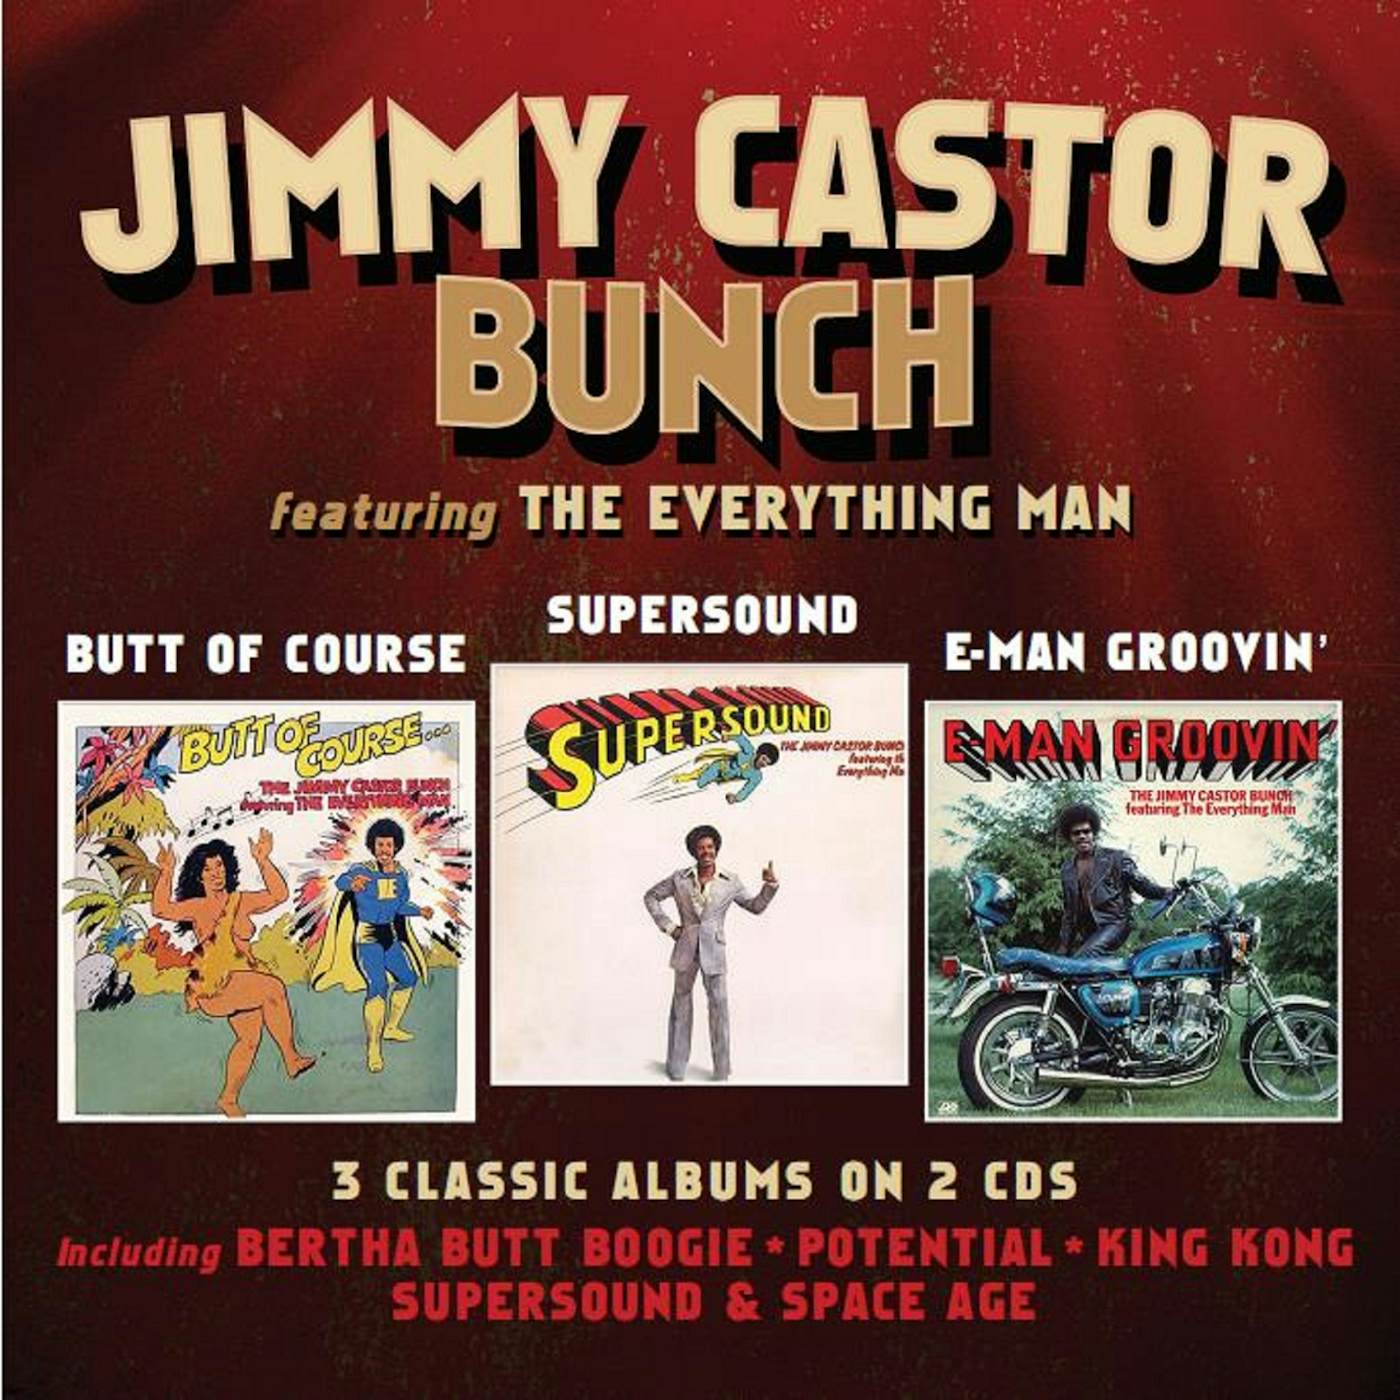 The Jimmy Castor Bunch Butt Of Course/Supersound/E Man Groovin' CD